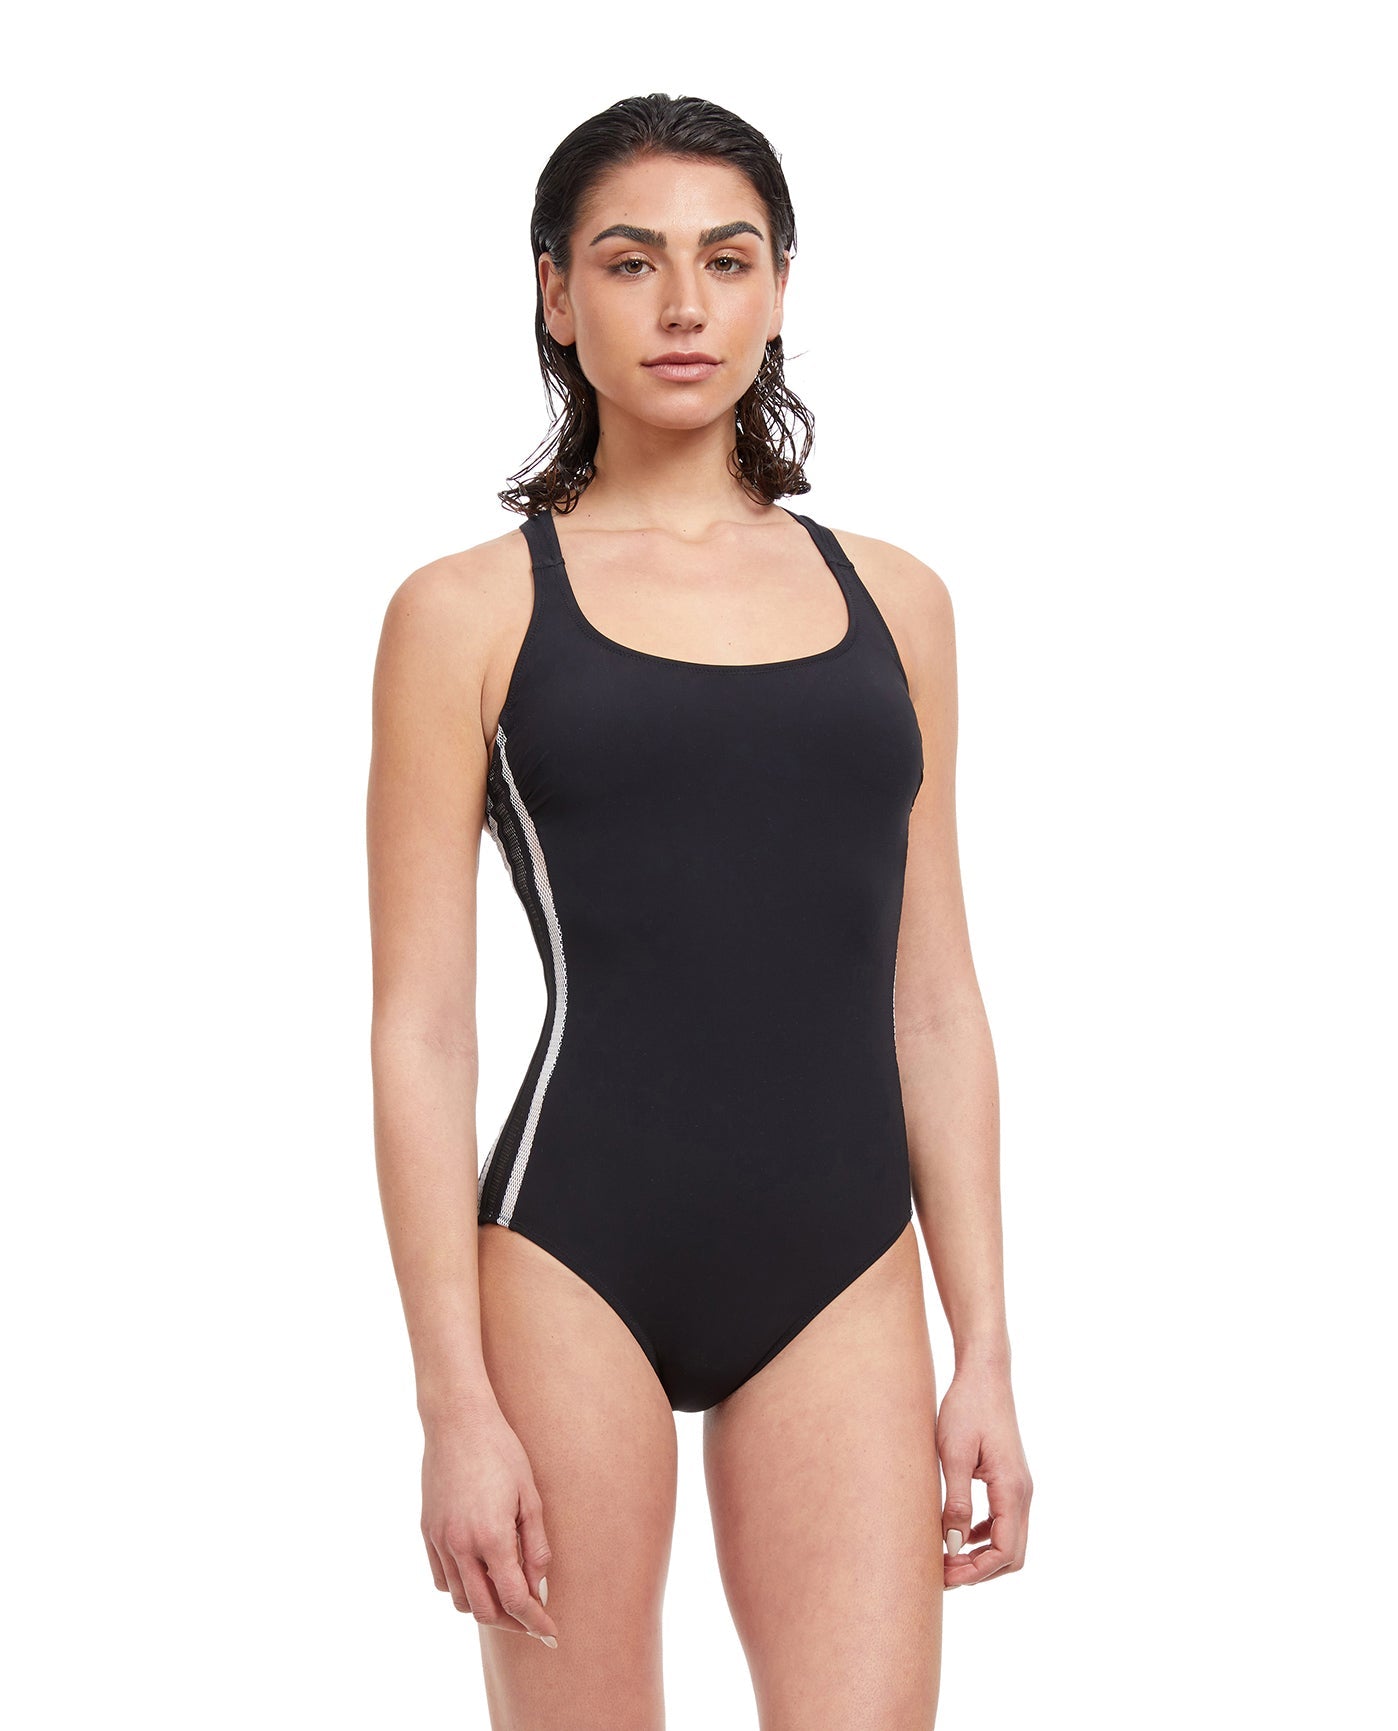 Front View Of Free Sport Upstream Round Neck Y-Back One Piece Swimsuit | FREE SPORT UPSTREAM BLACK